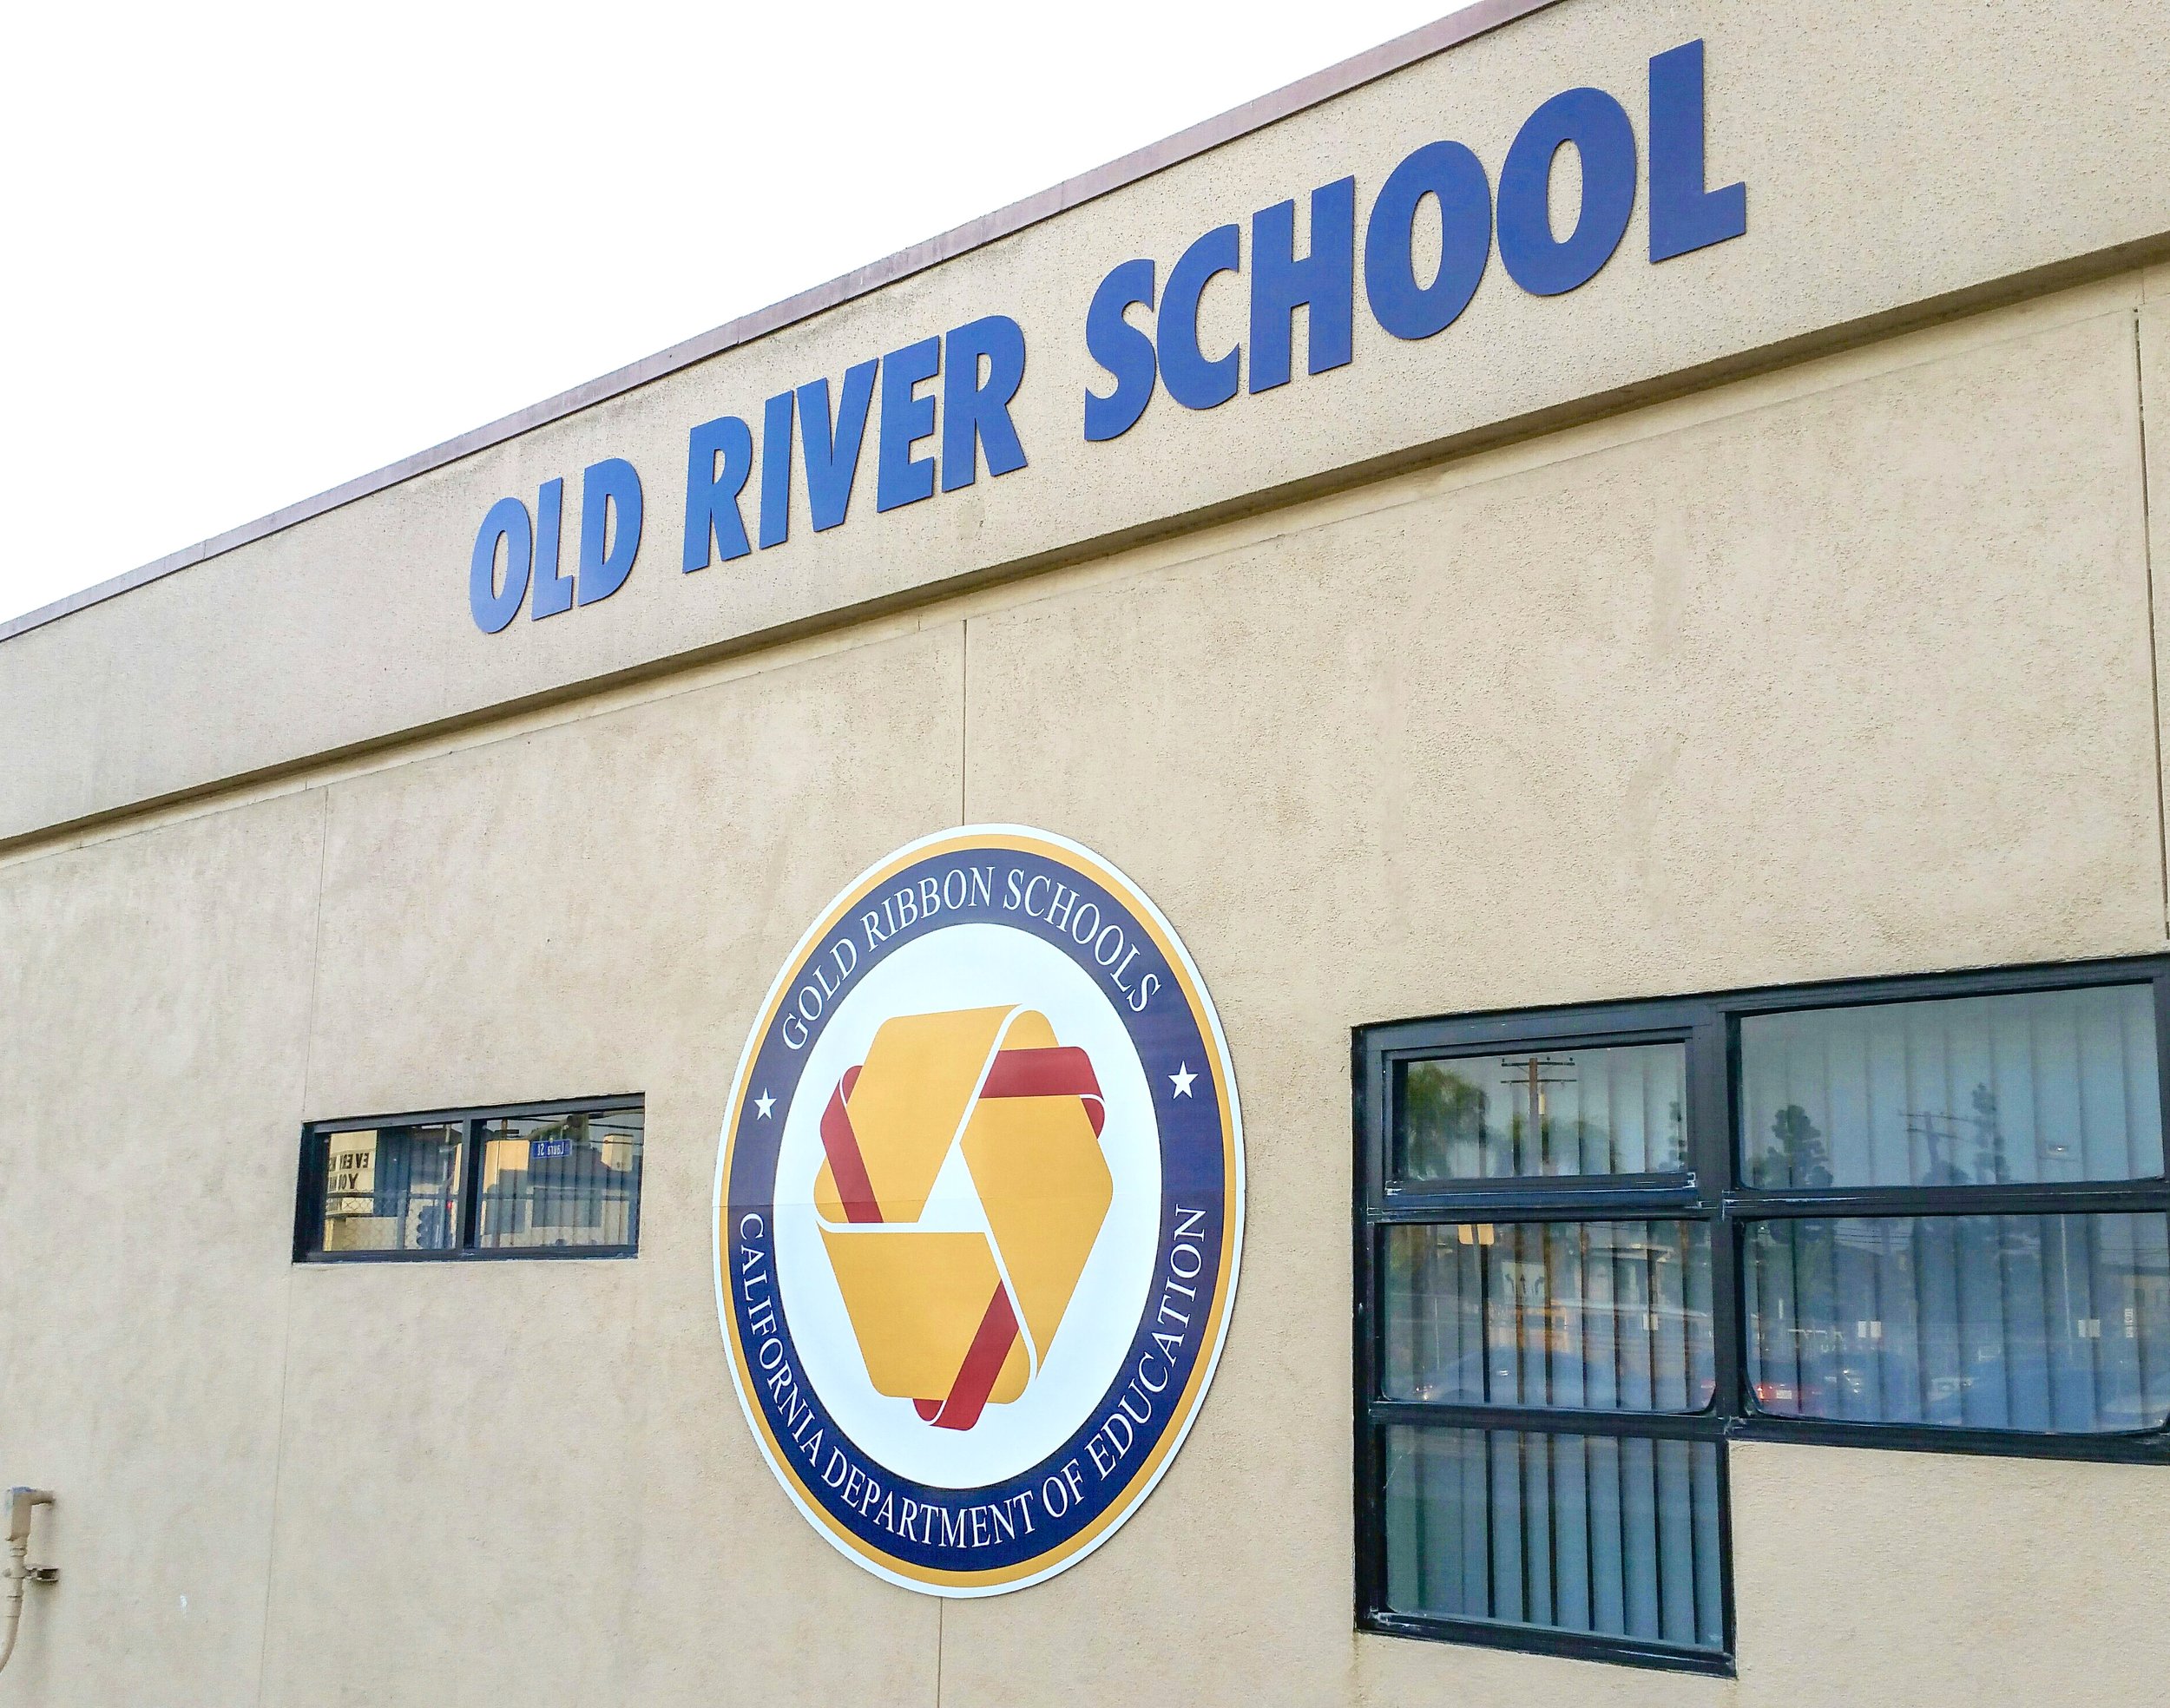 Old River School building wall sign letters